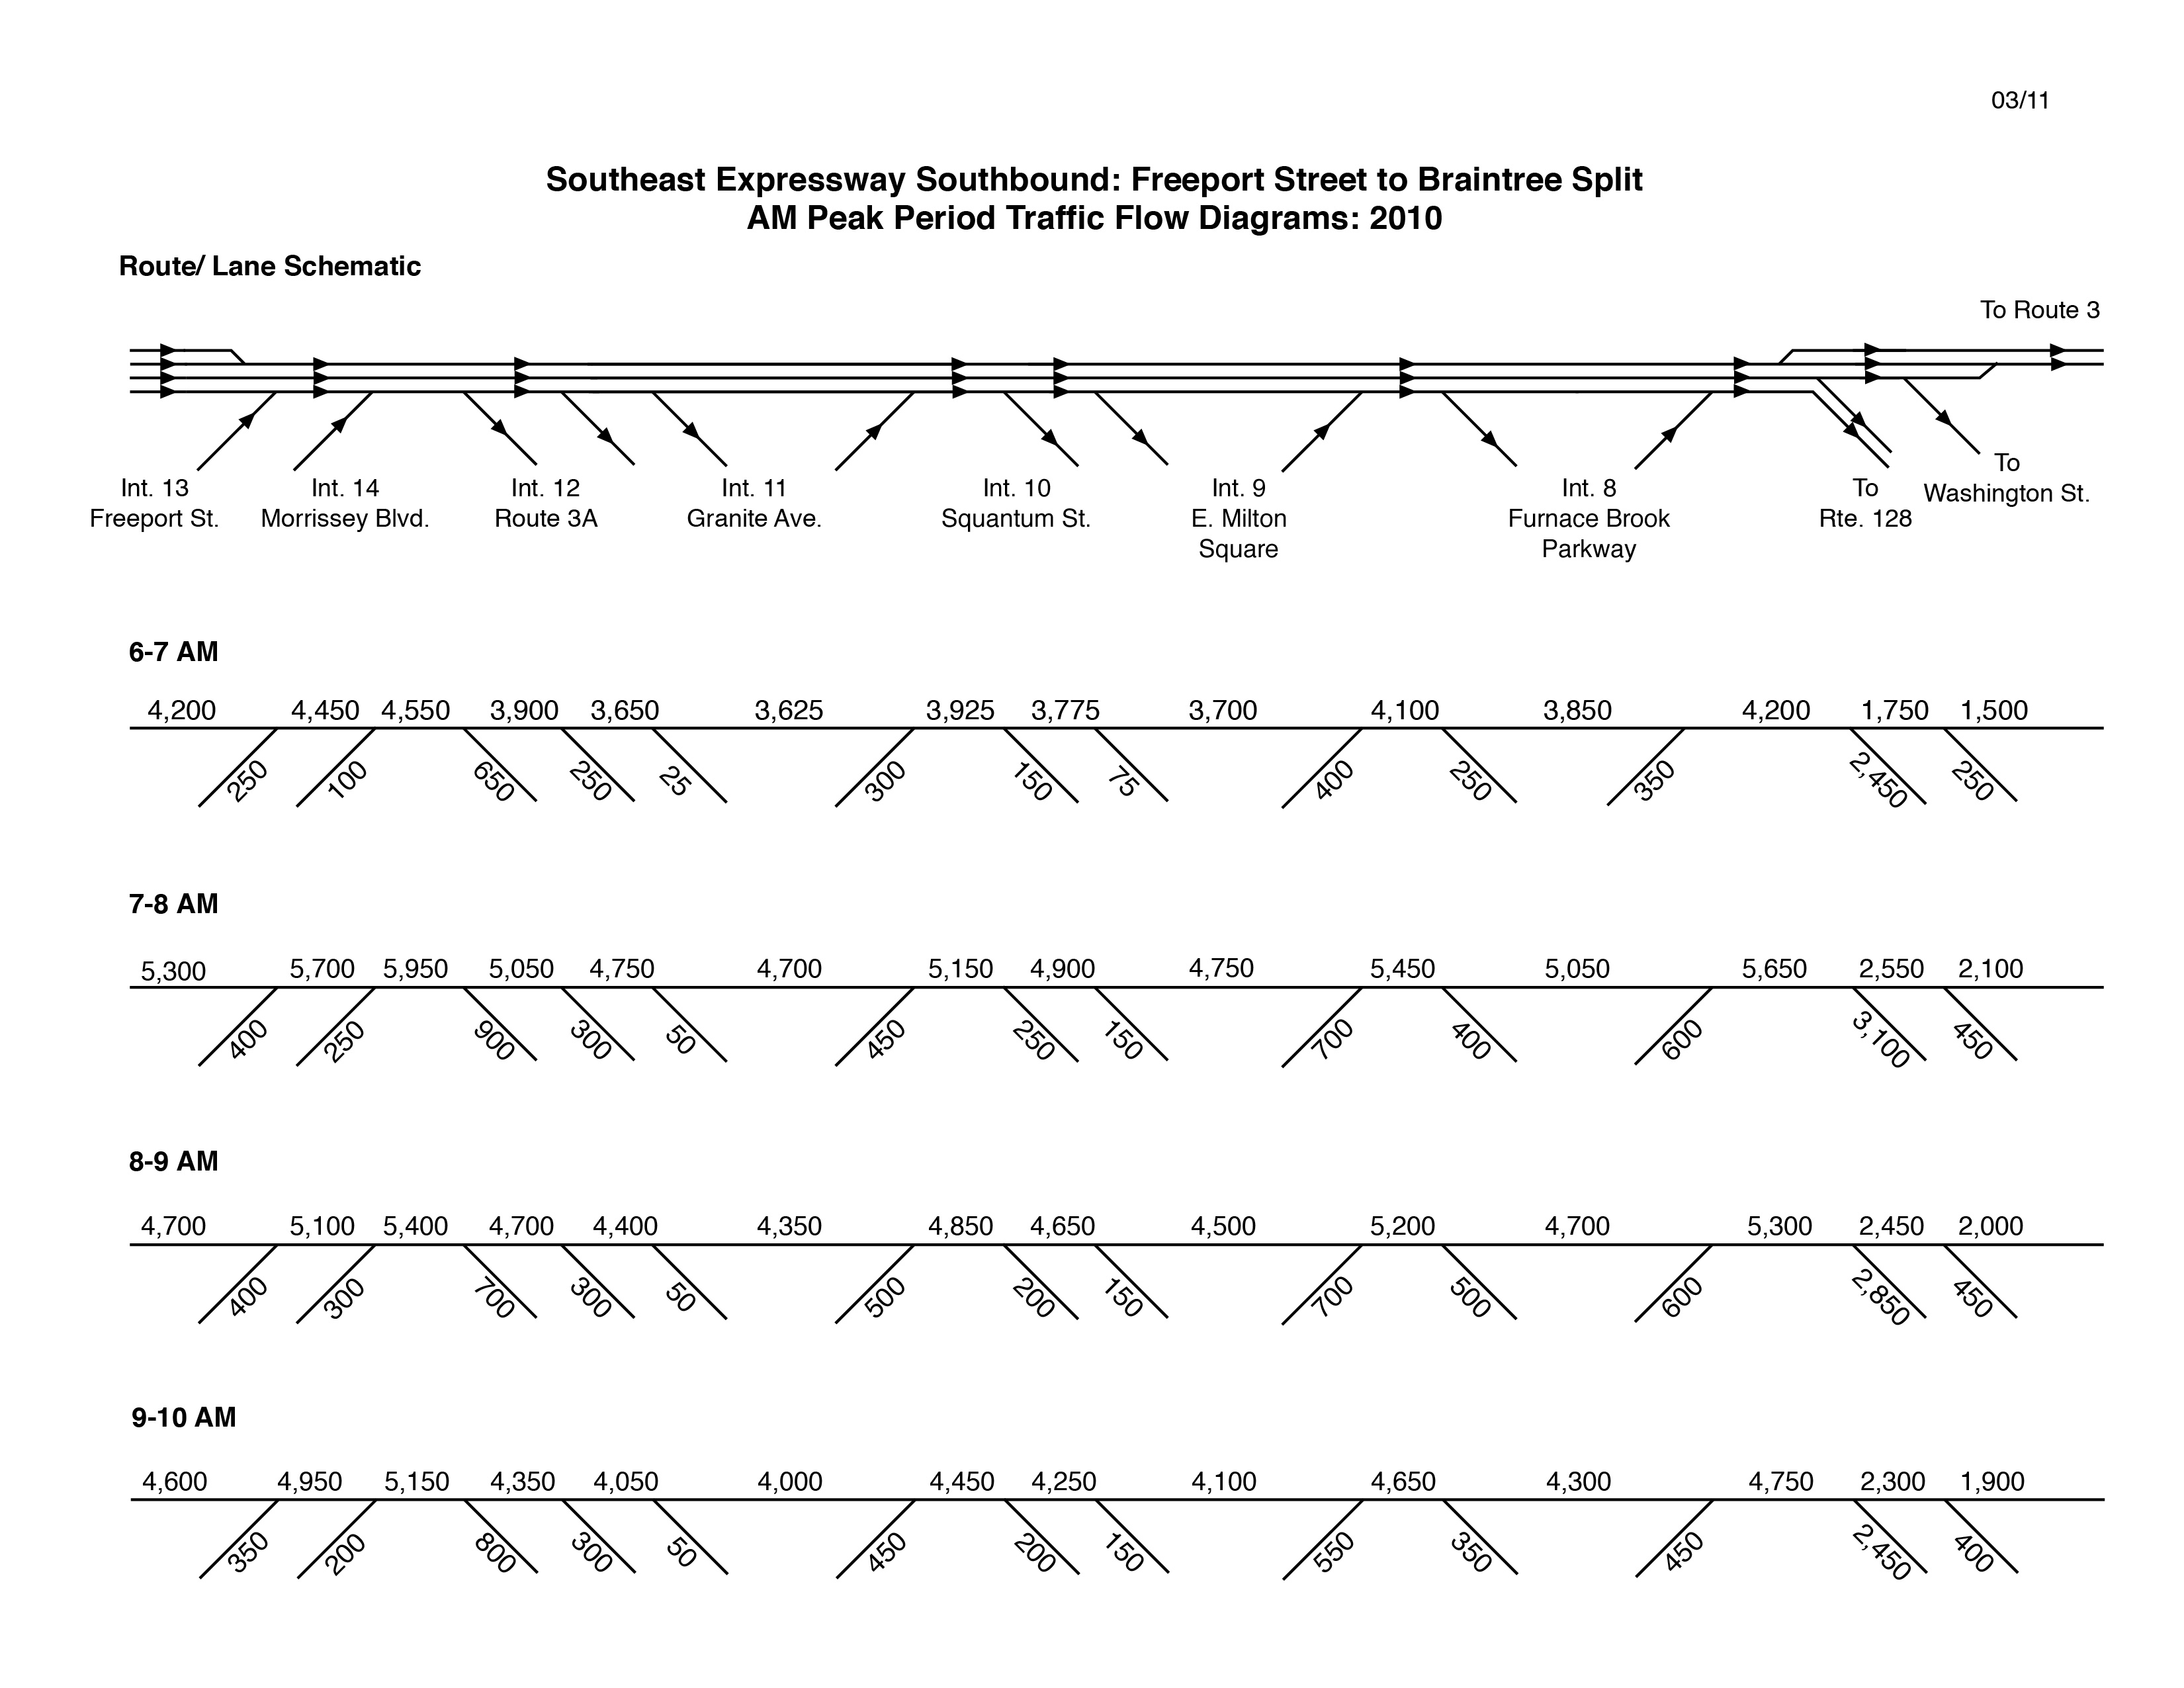 Sample balanced volume chart for Southeast Expressway during AM peak period.